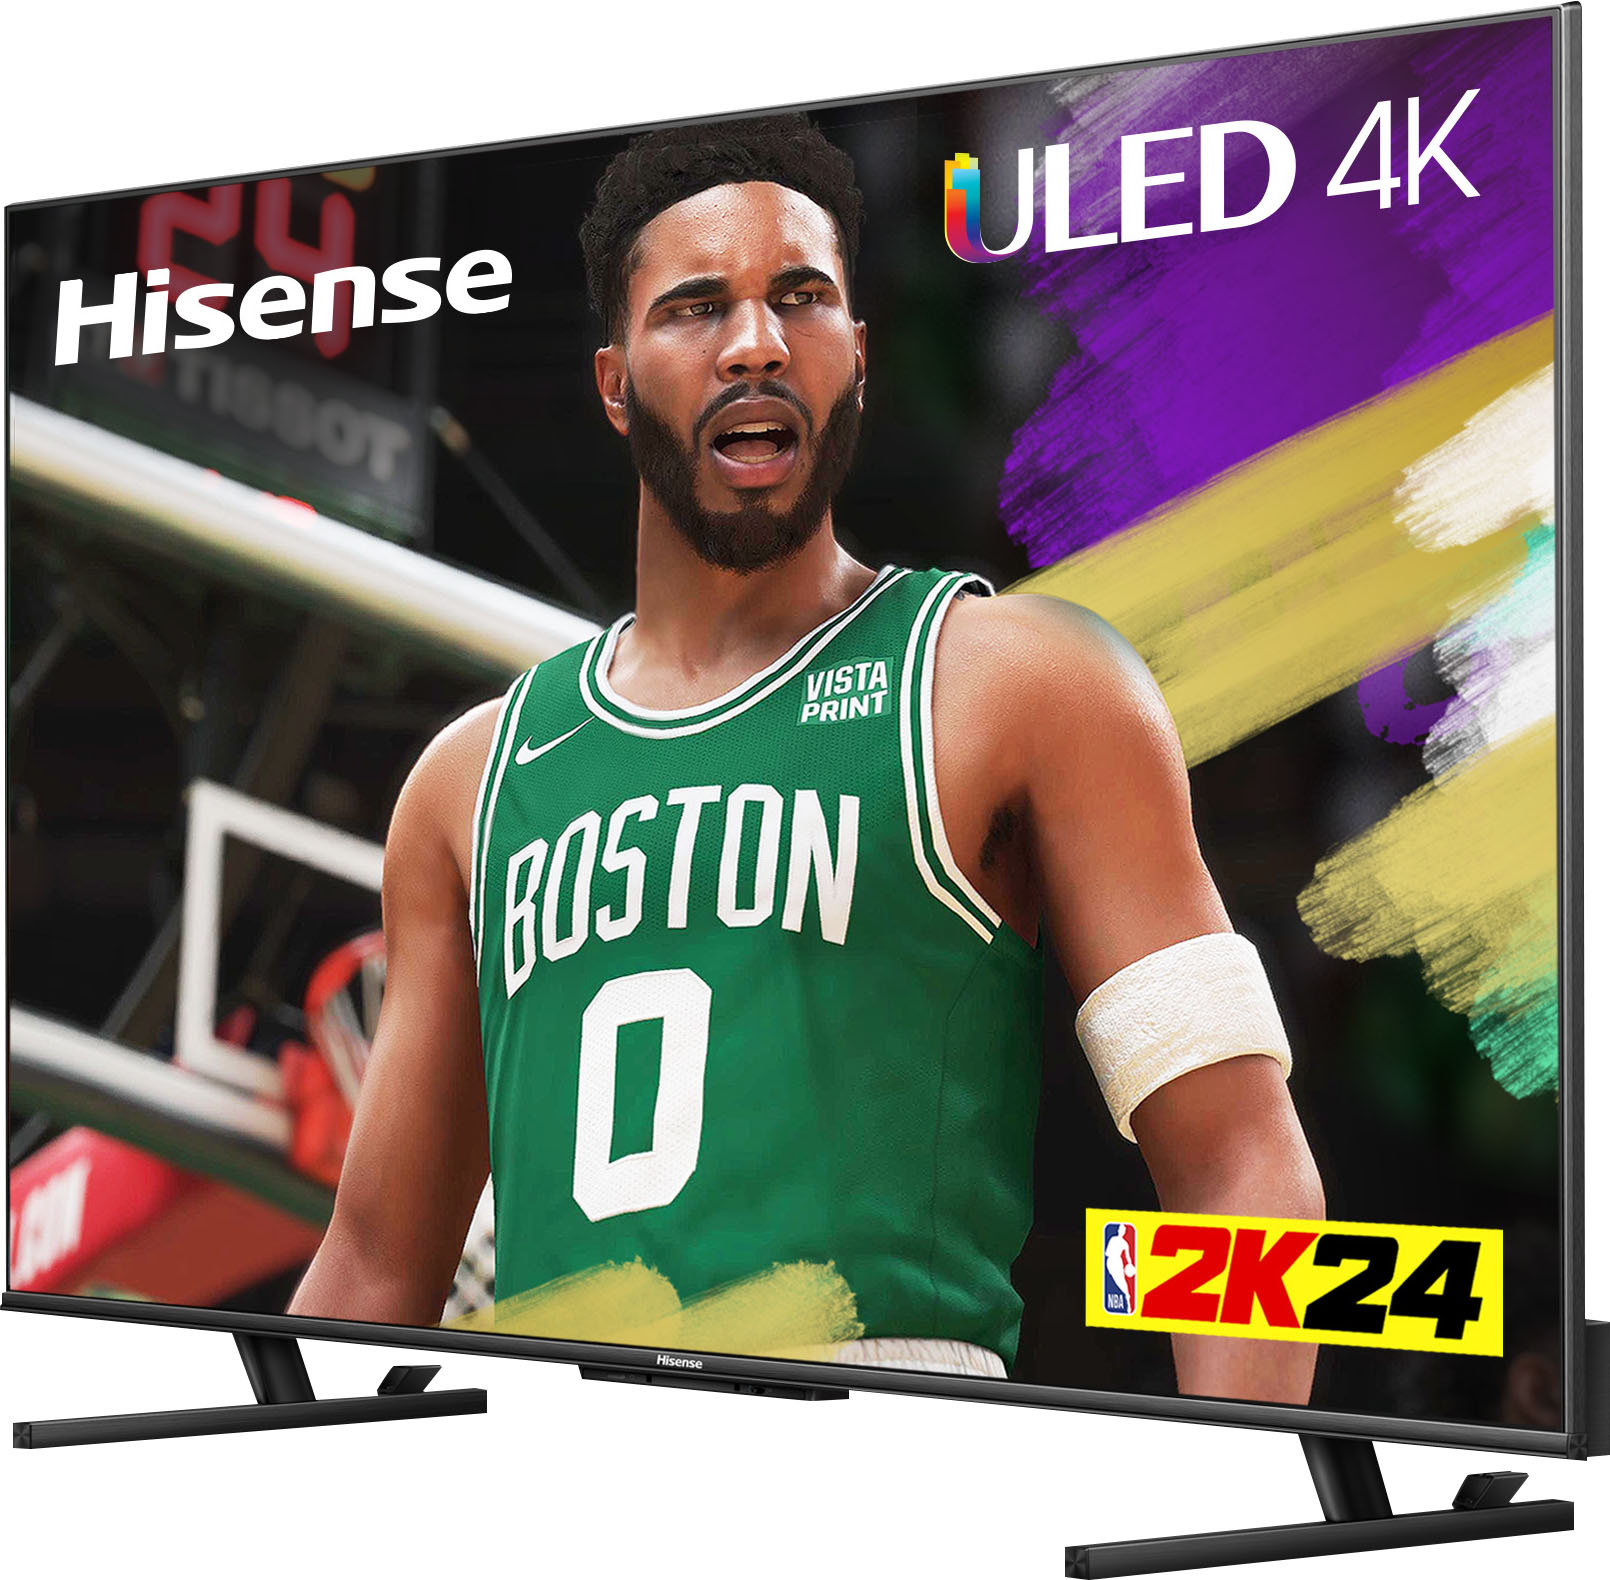 Hisense U6K TV review: A lot for the price